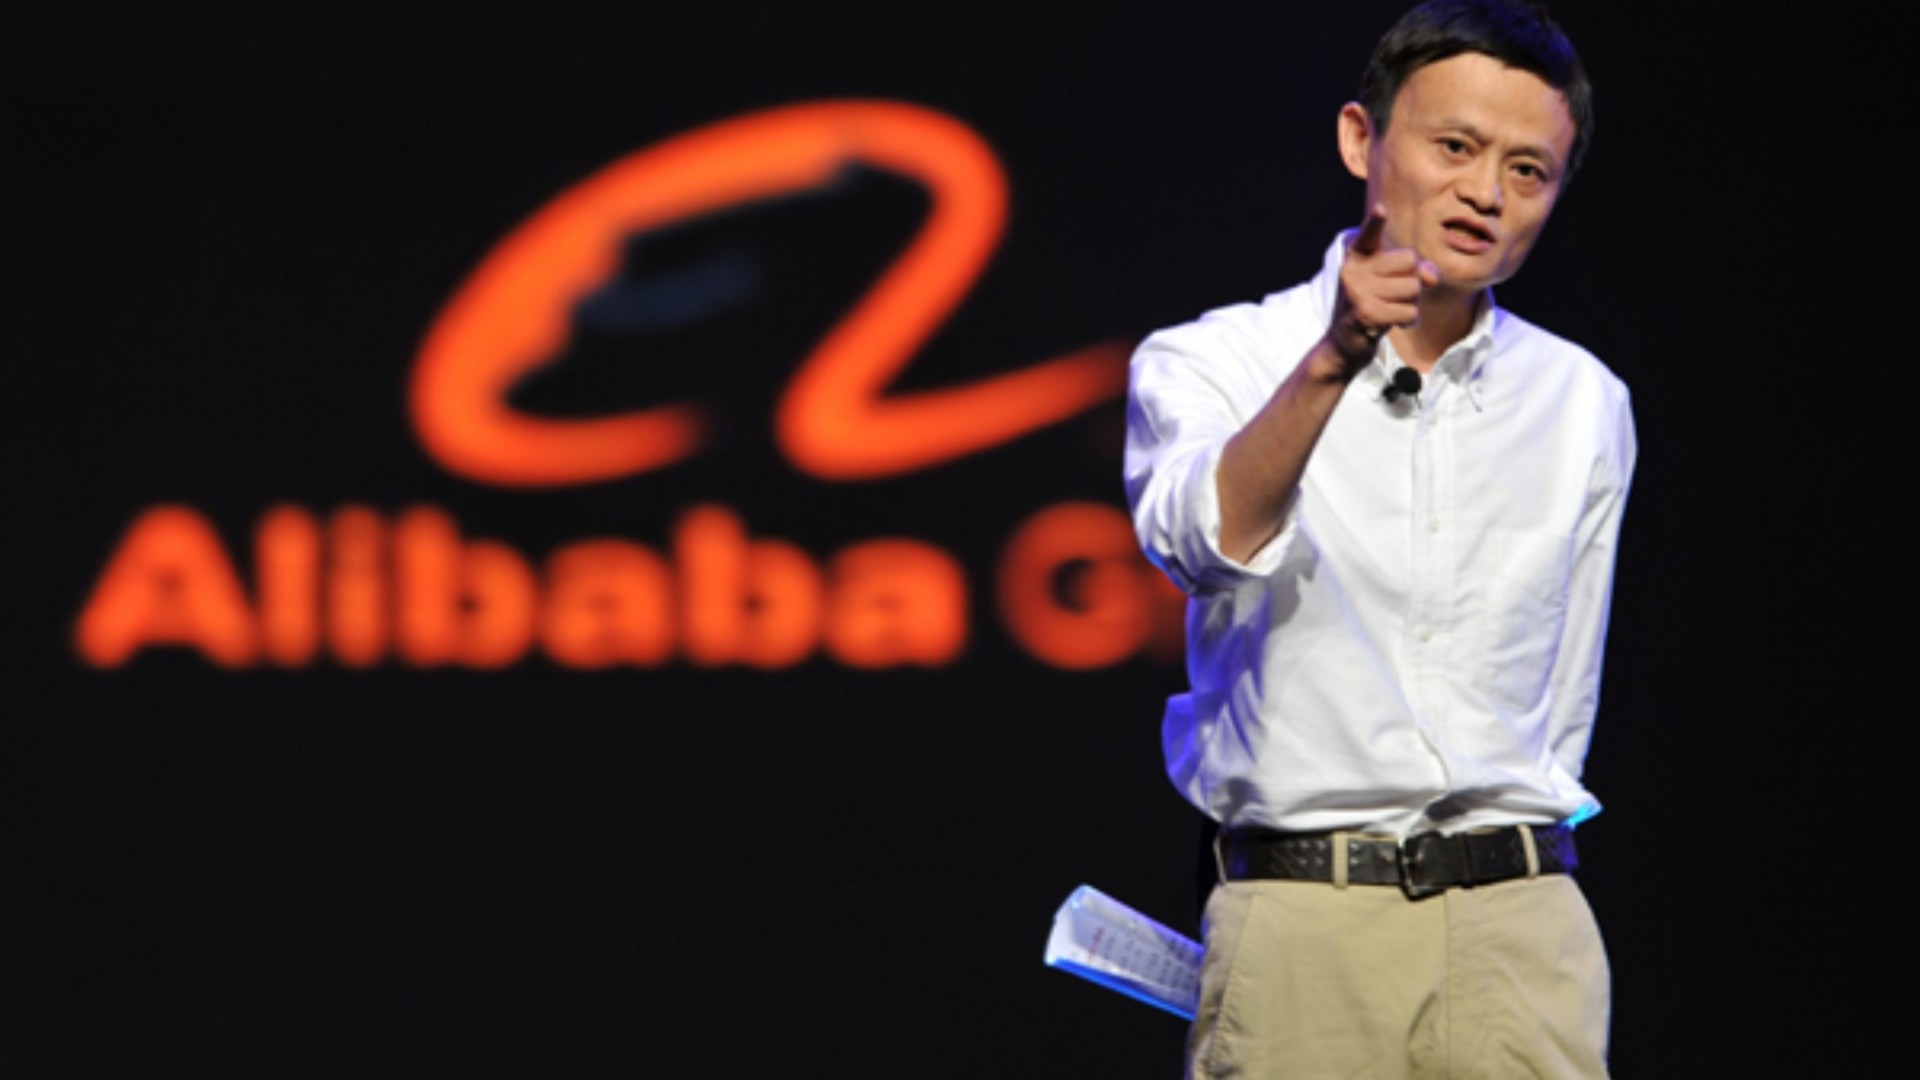 Jack Ma, China’s Richest Man, Steps Down From $460 Billion Alibaba Empire